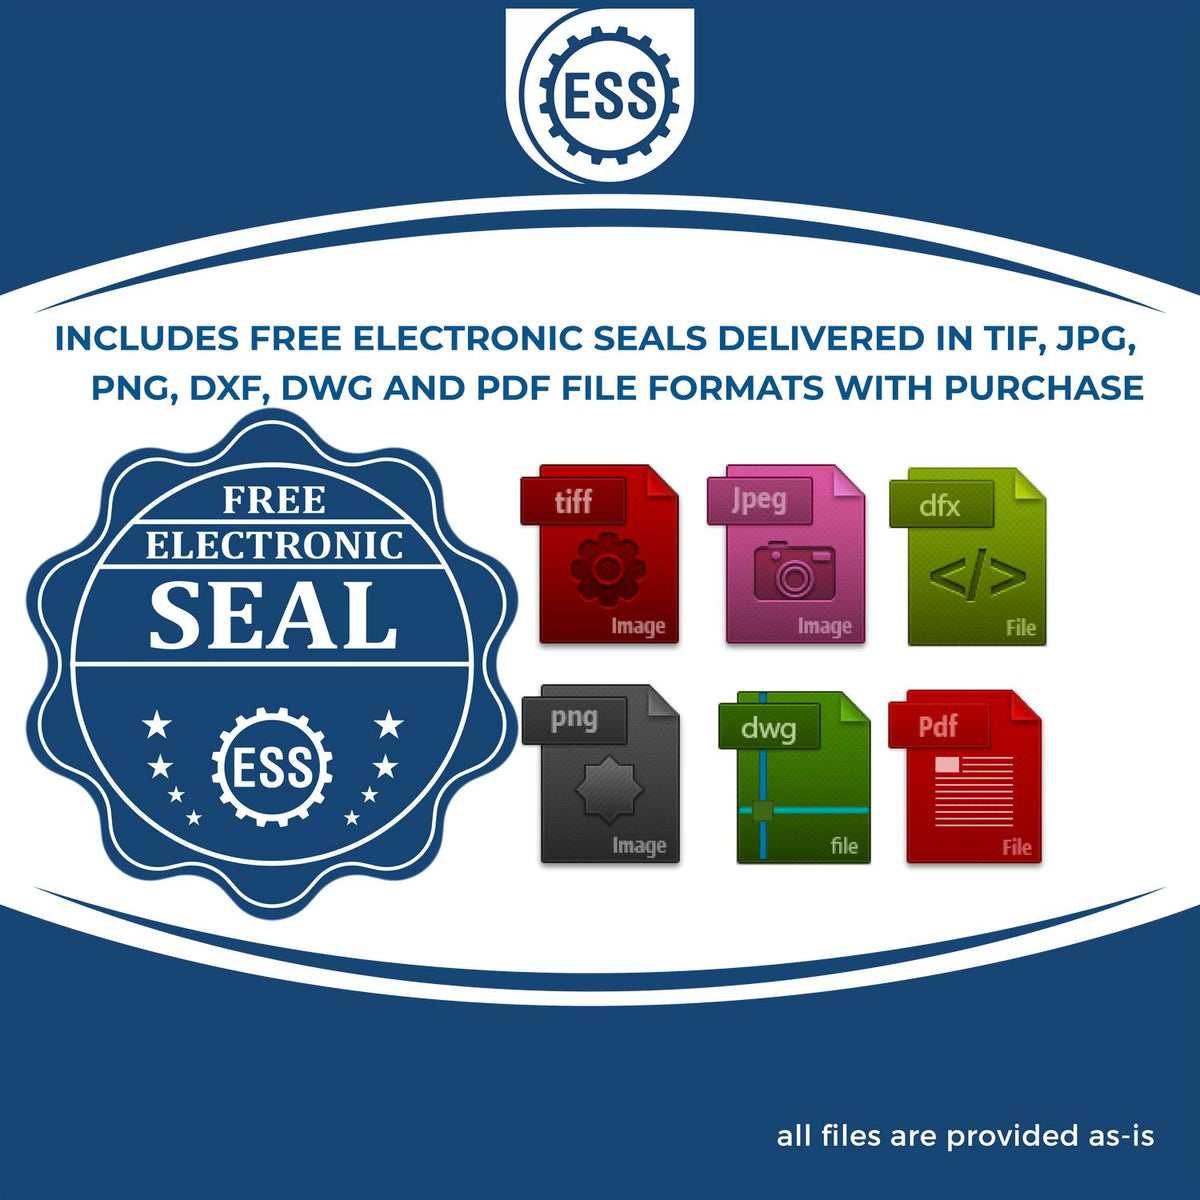 An infographic for the free electronic seal for the State of Washington Long Reach Architectural Embossing Seal illustrating the different file type icons such as DXF, DWG, TIF, JPG and PNG.